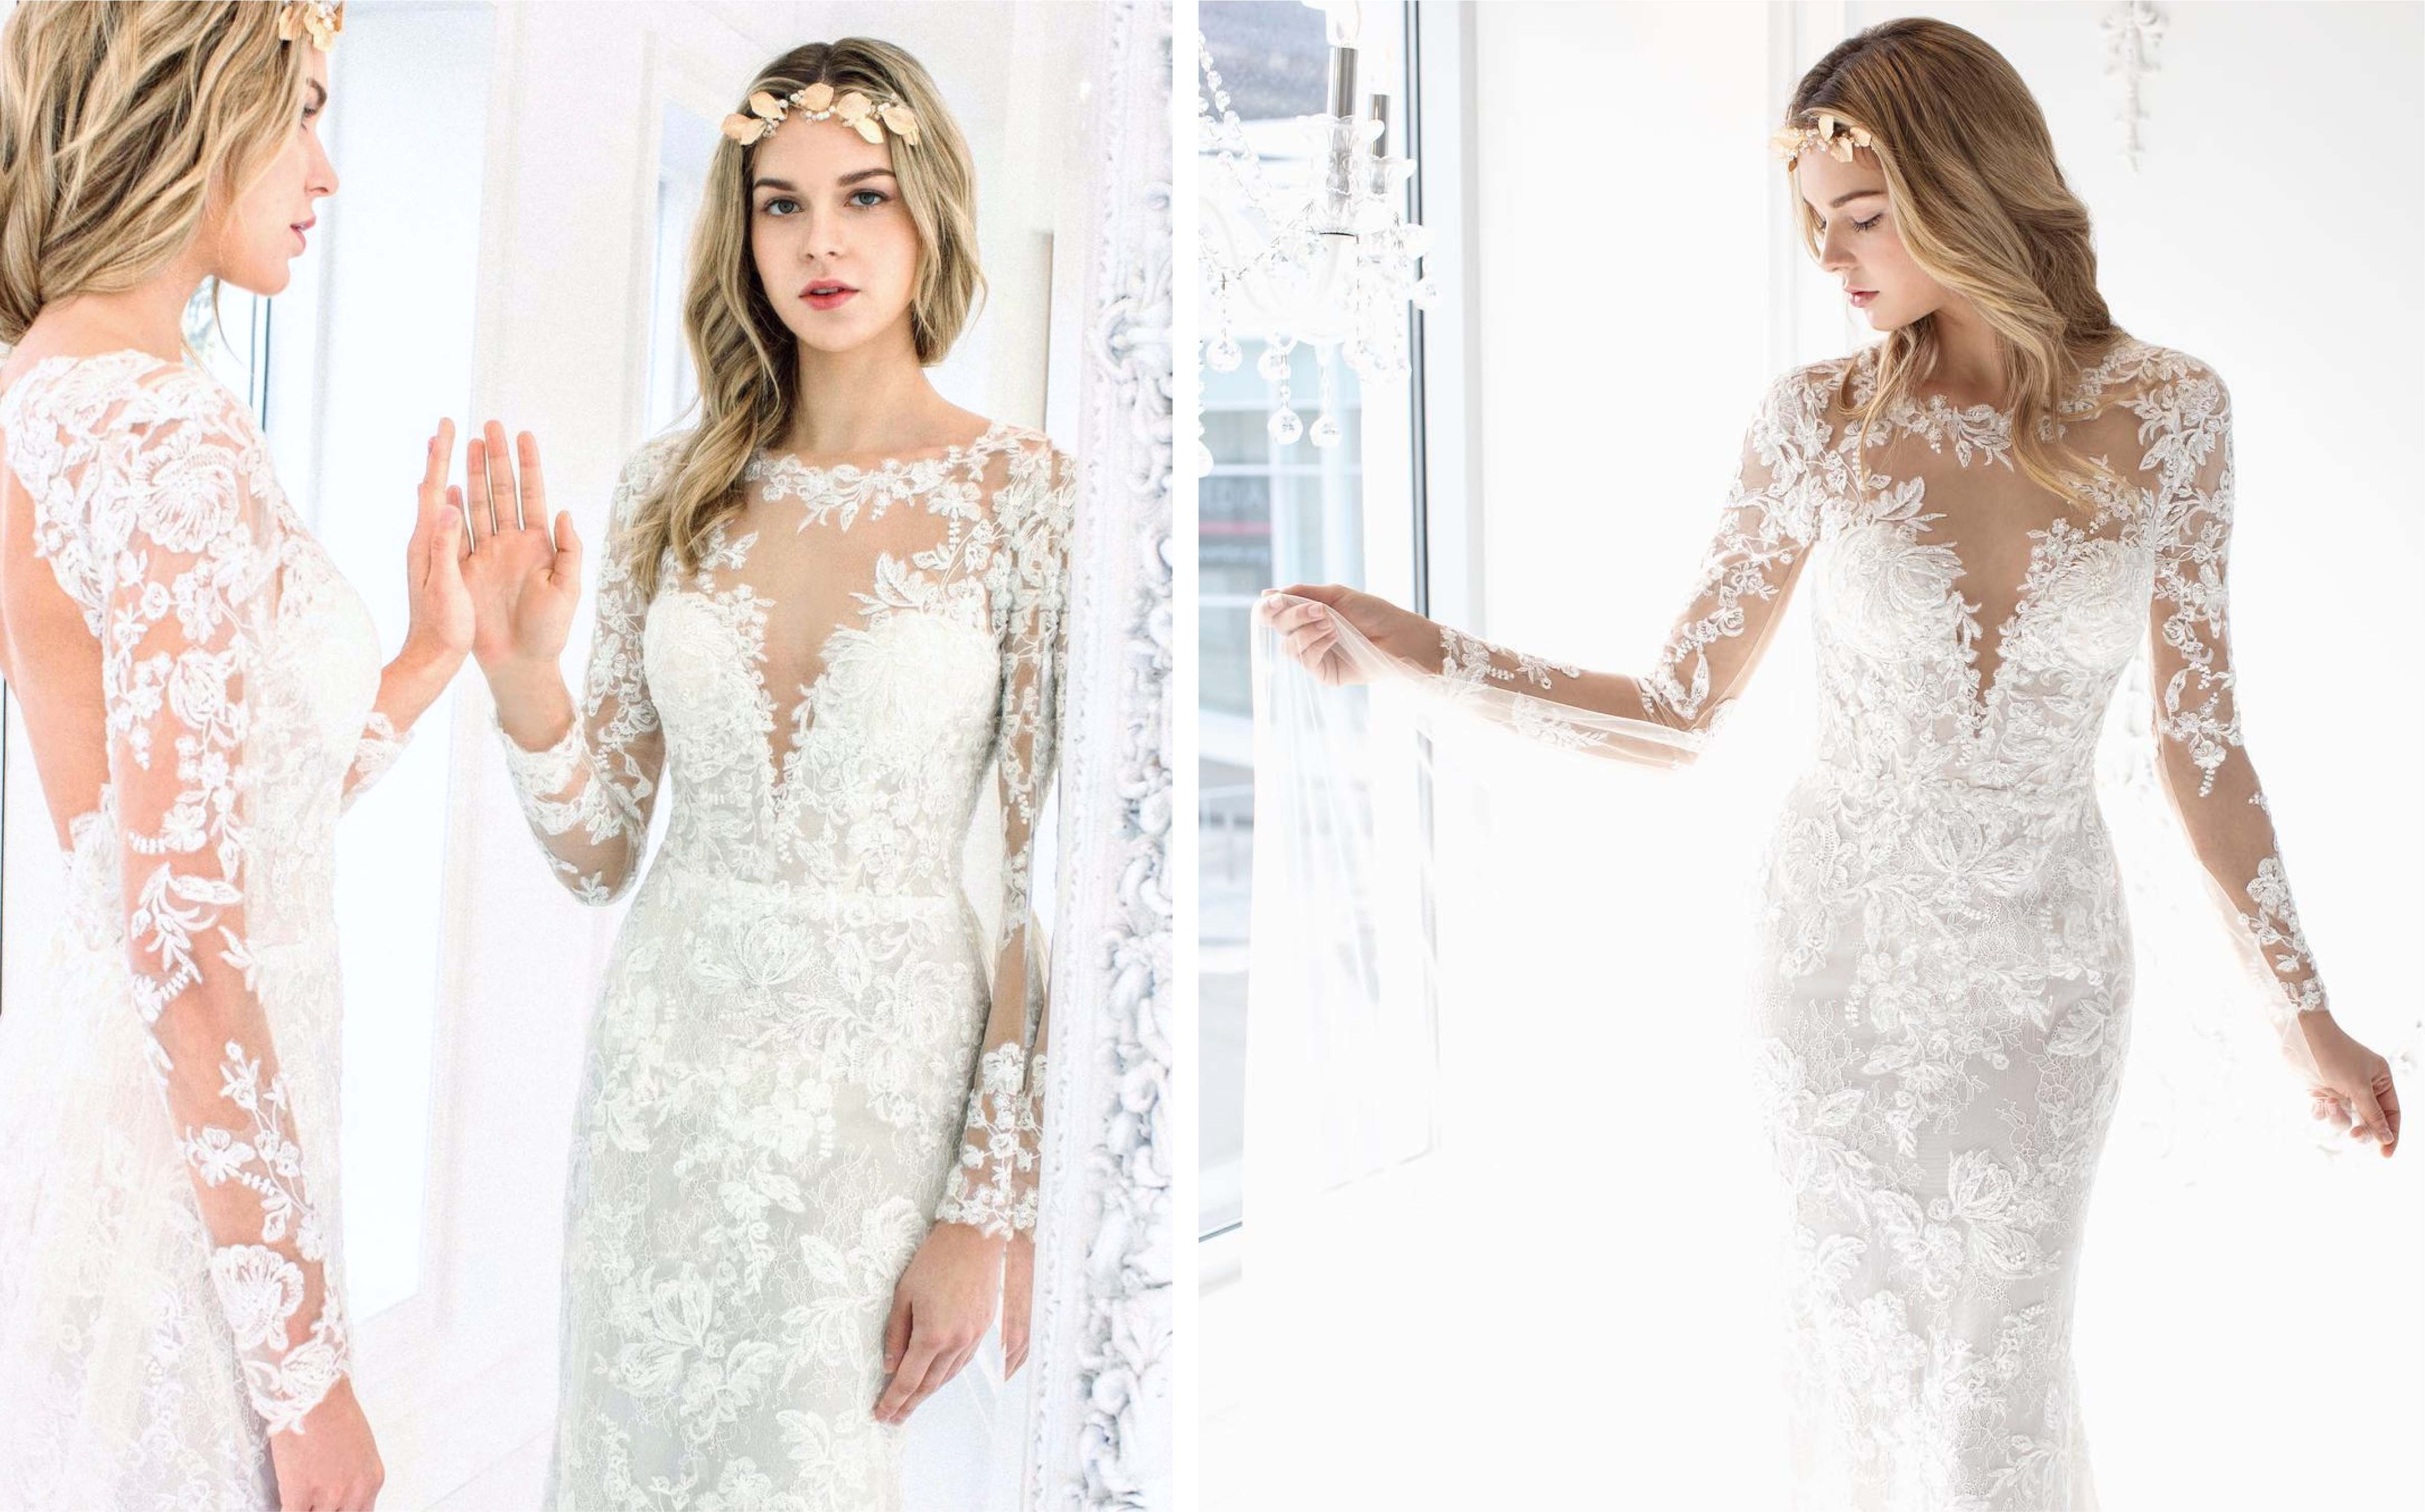 Dreamy Winter Wedding Trends and Inspiration